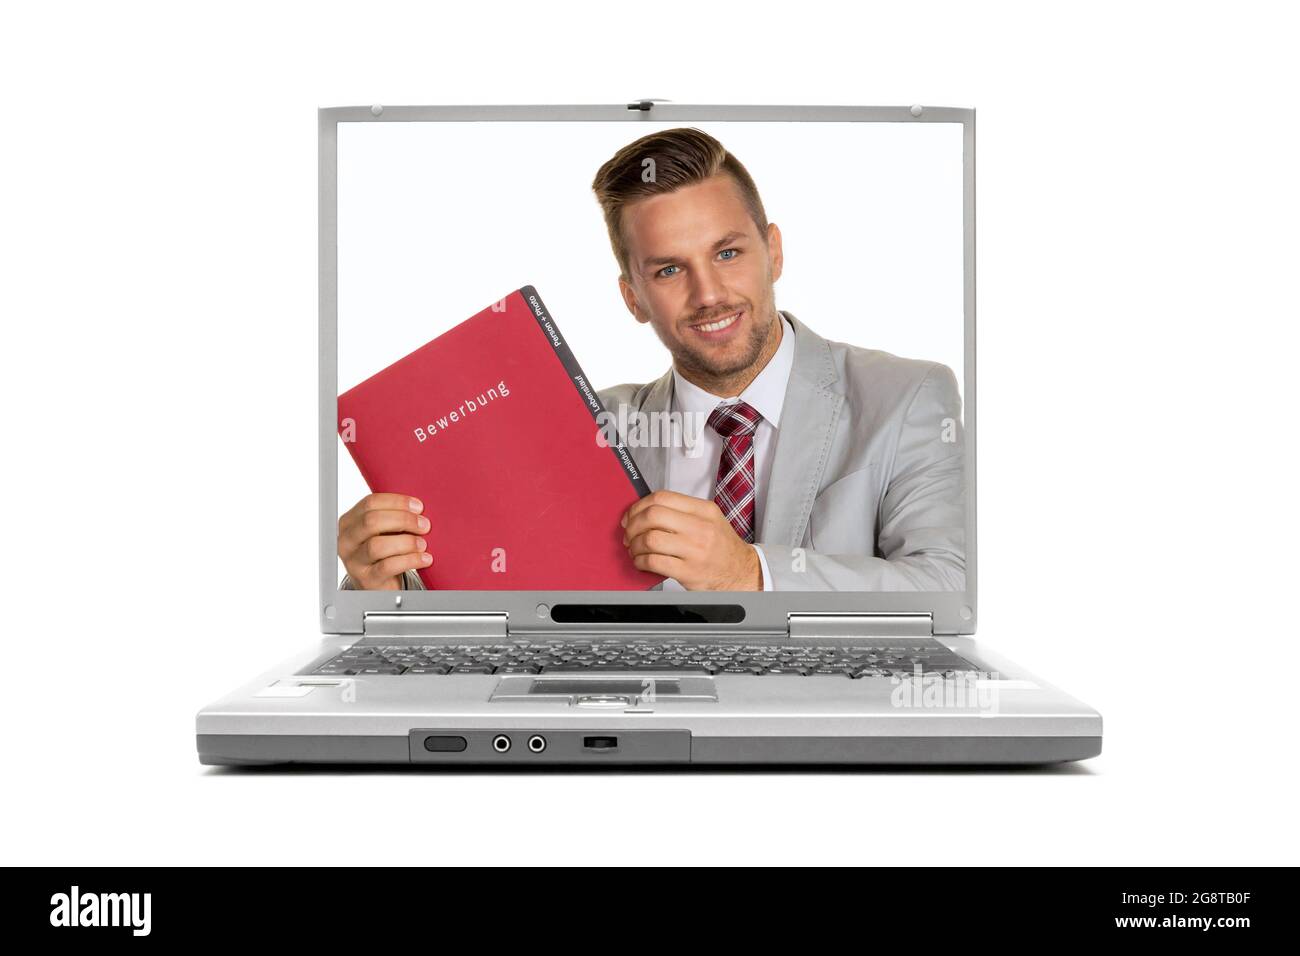 man with application documents on the display of a laptop computer Stock Photo